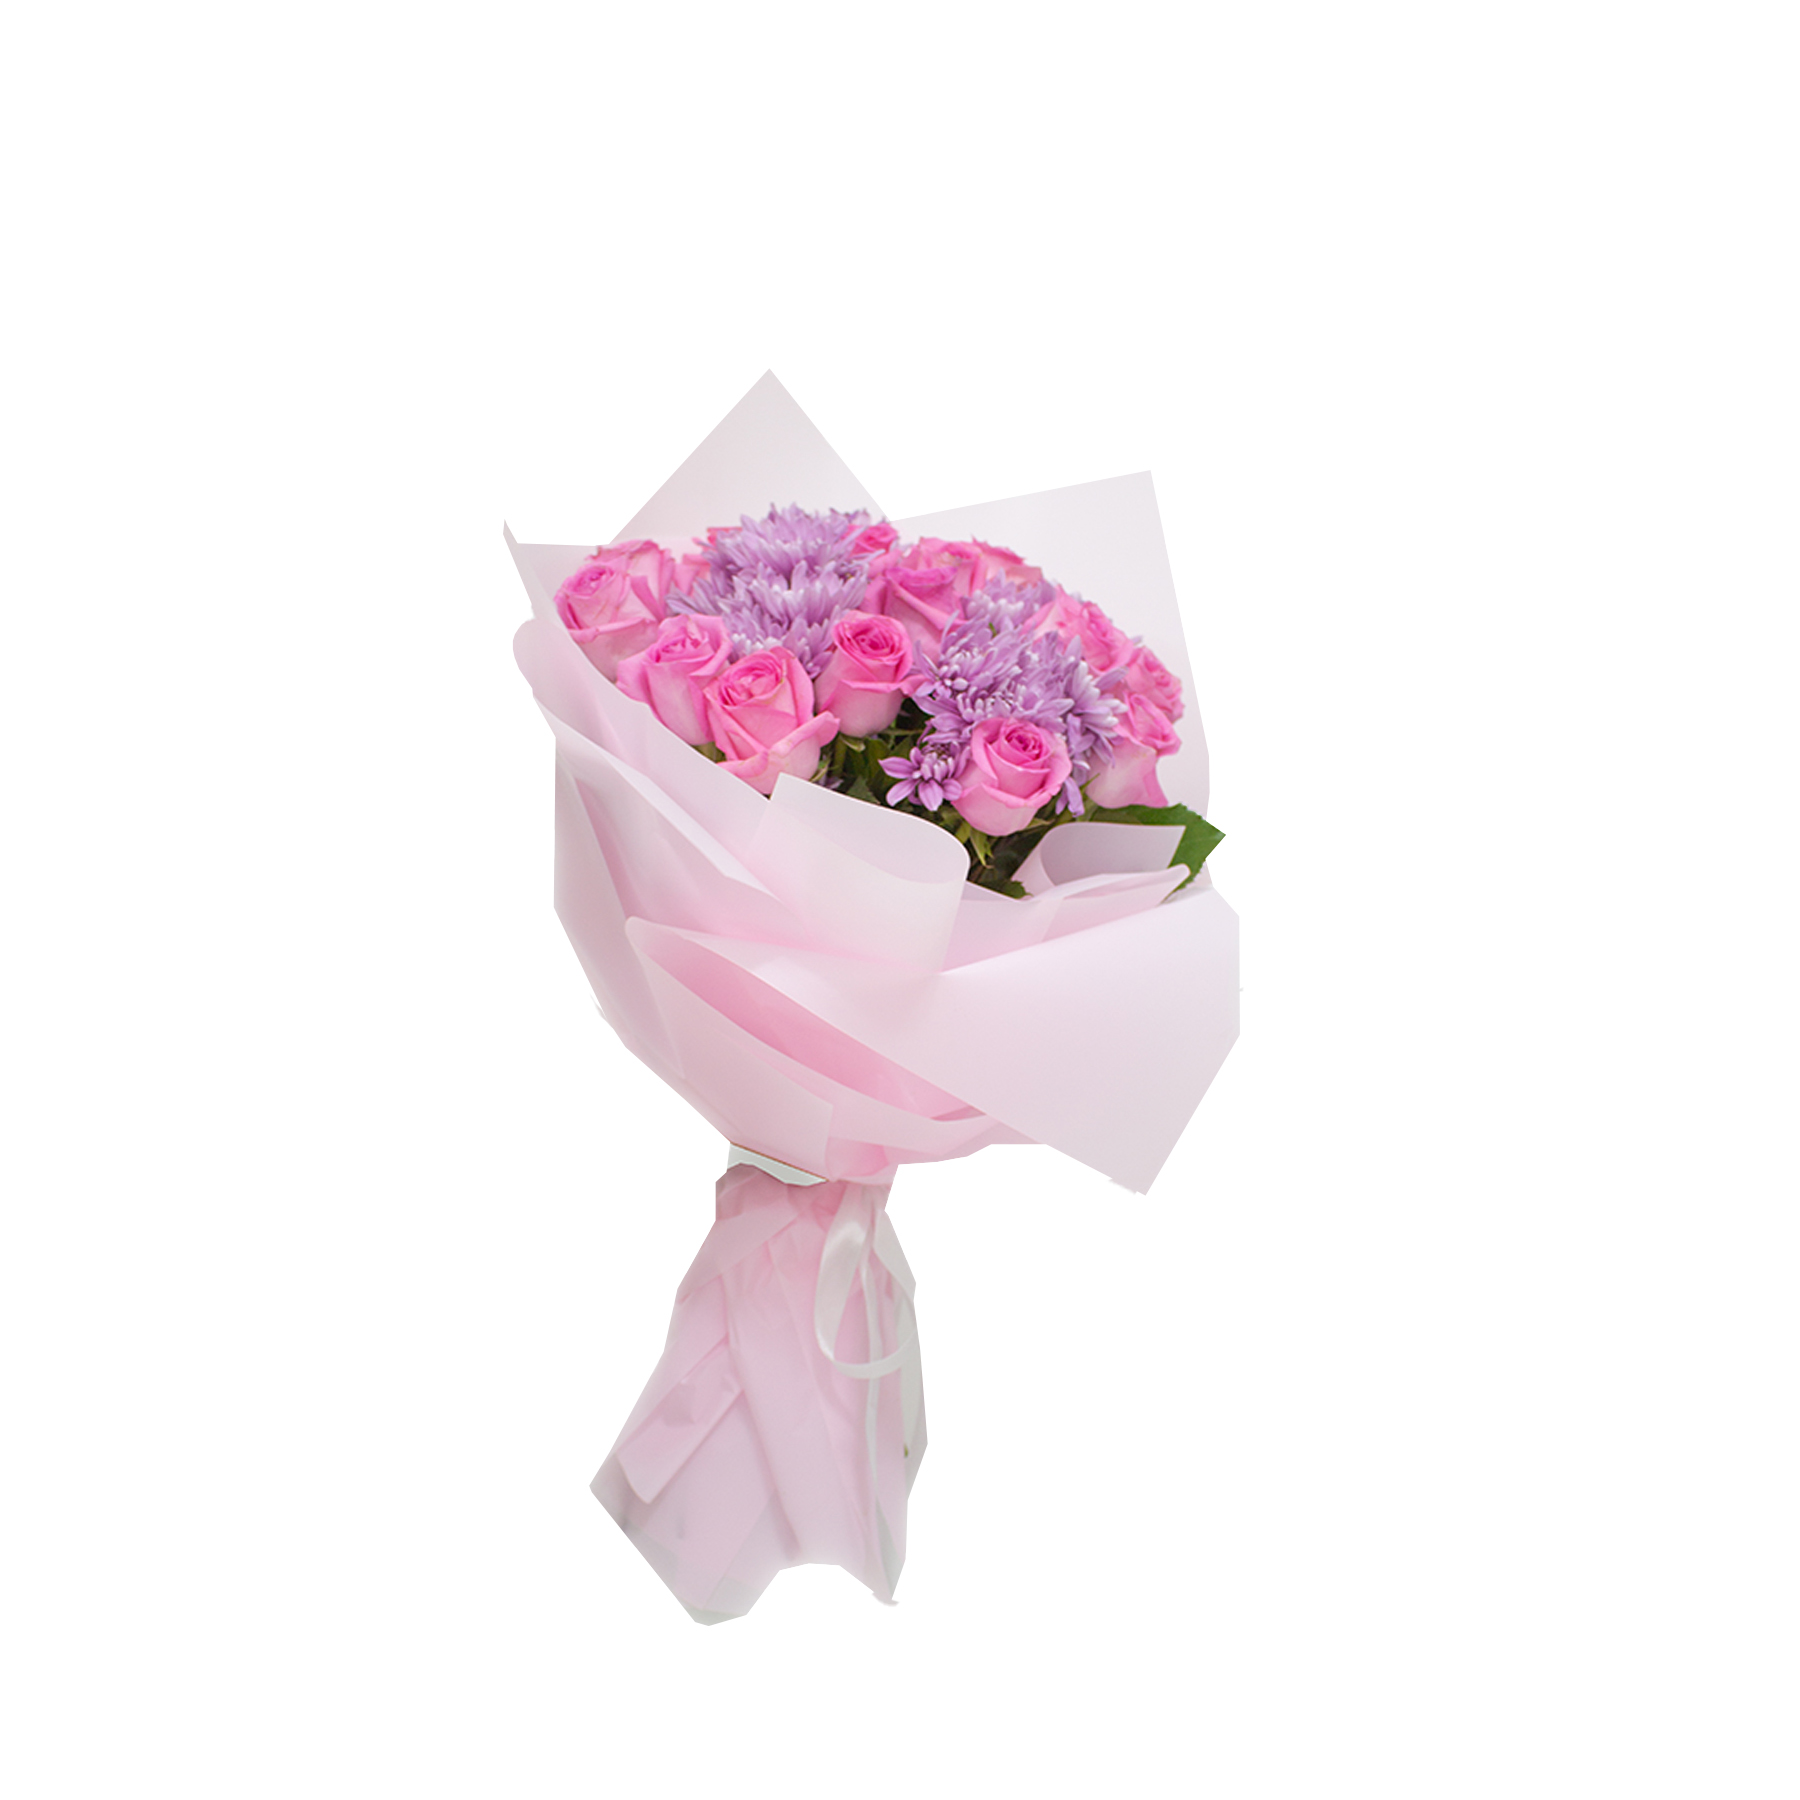 bouquet-of-pink-roses-with-purple-chrysanthemum2